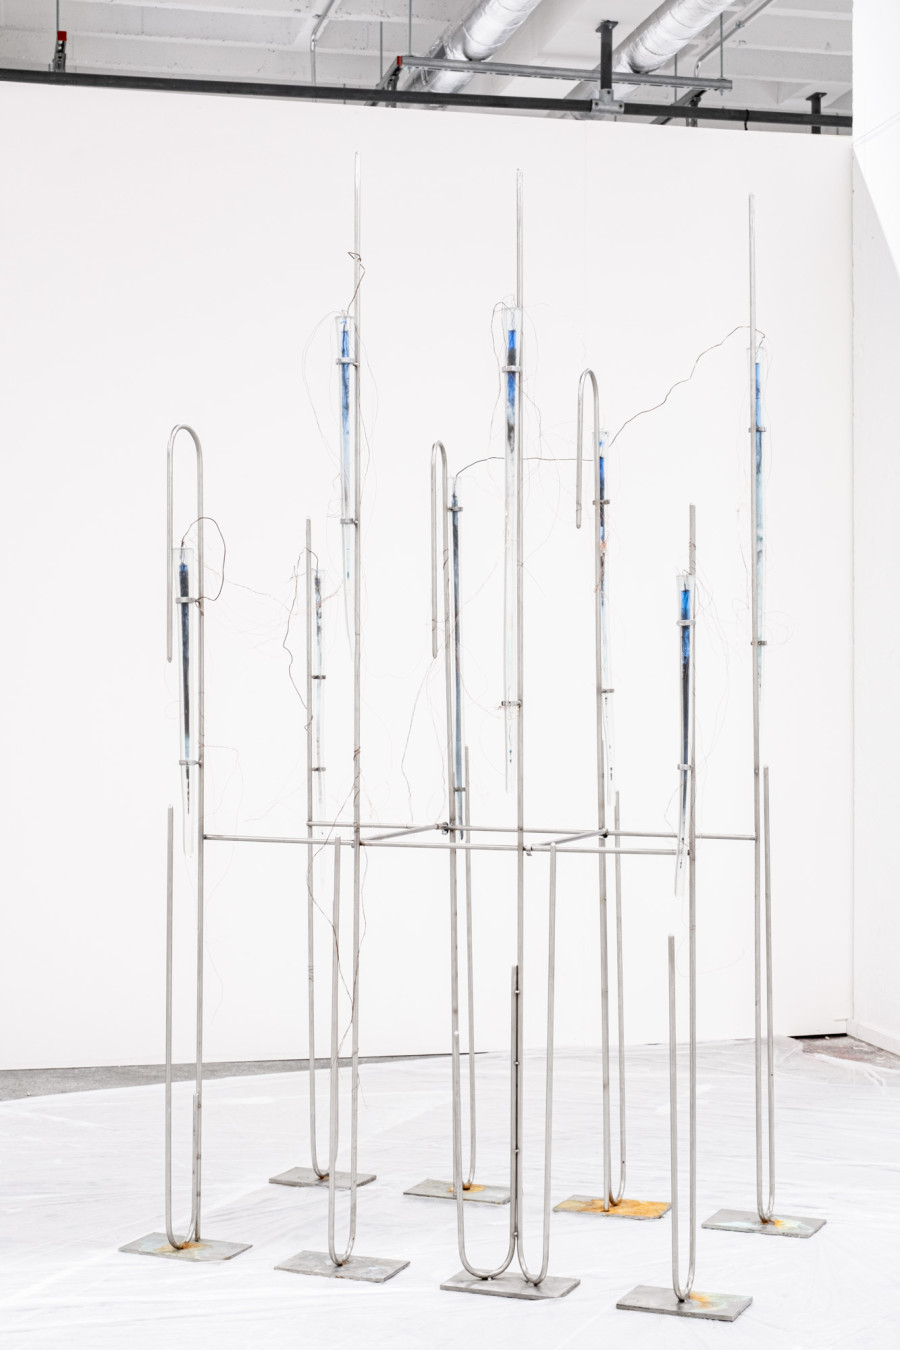 Exhibition View Group Show «Zahltag; view on Matheline Marmy, Retainer-Continuity, 2023, blown glass, stainless steel, copper wire, copper oxide, iron oxide, water, plastic sheet, 190 x 90 x 45 cm» at Le Commun, Geneva, 2024 / Photo: Daniel Leal / Courtesy: Spielact Festival